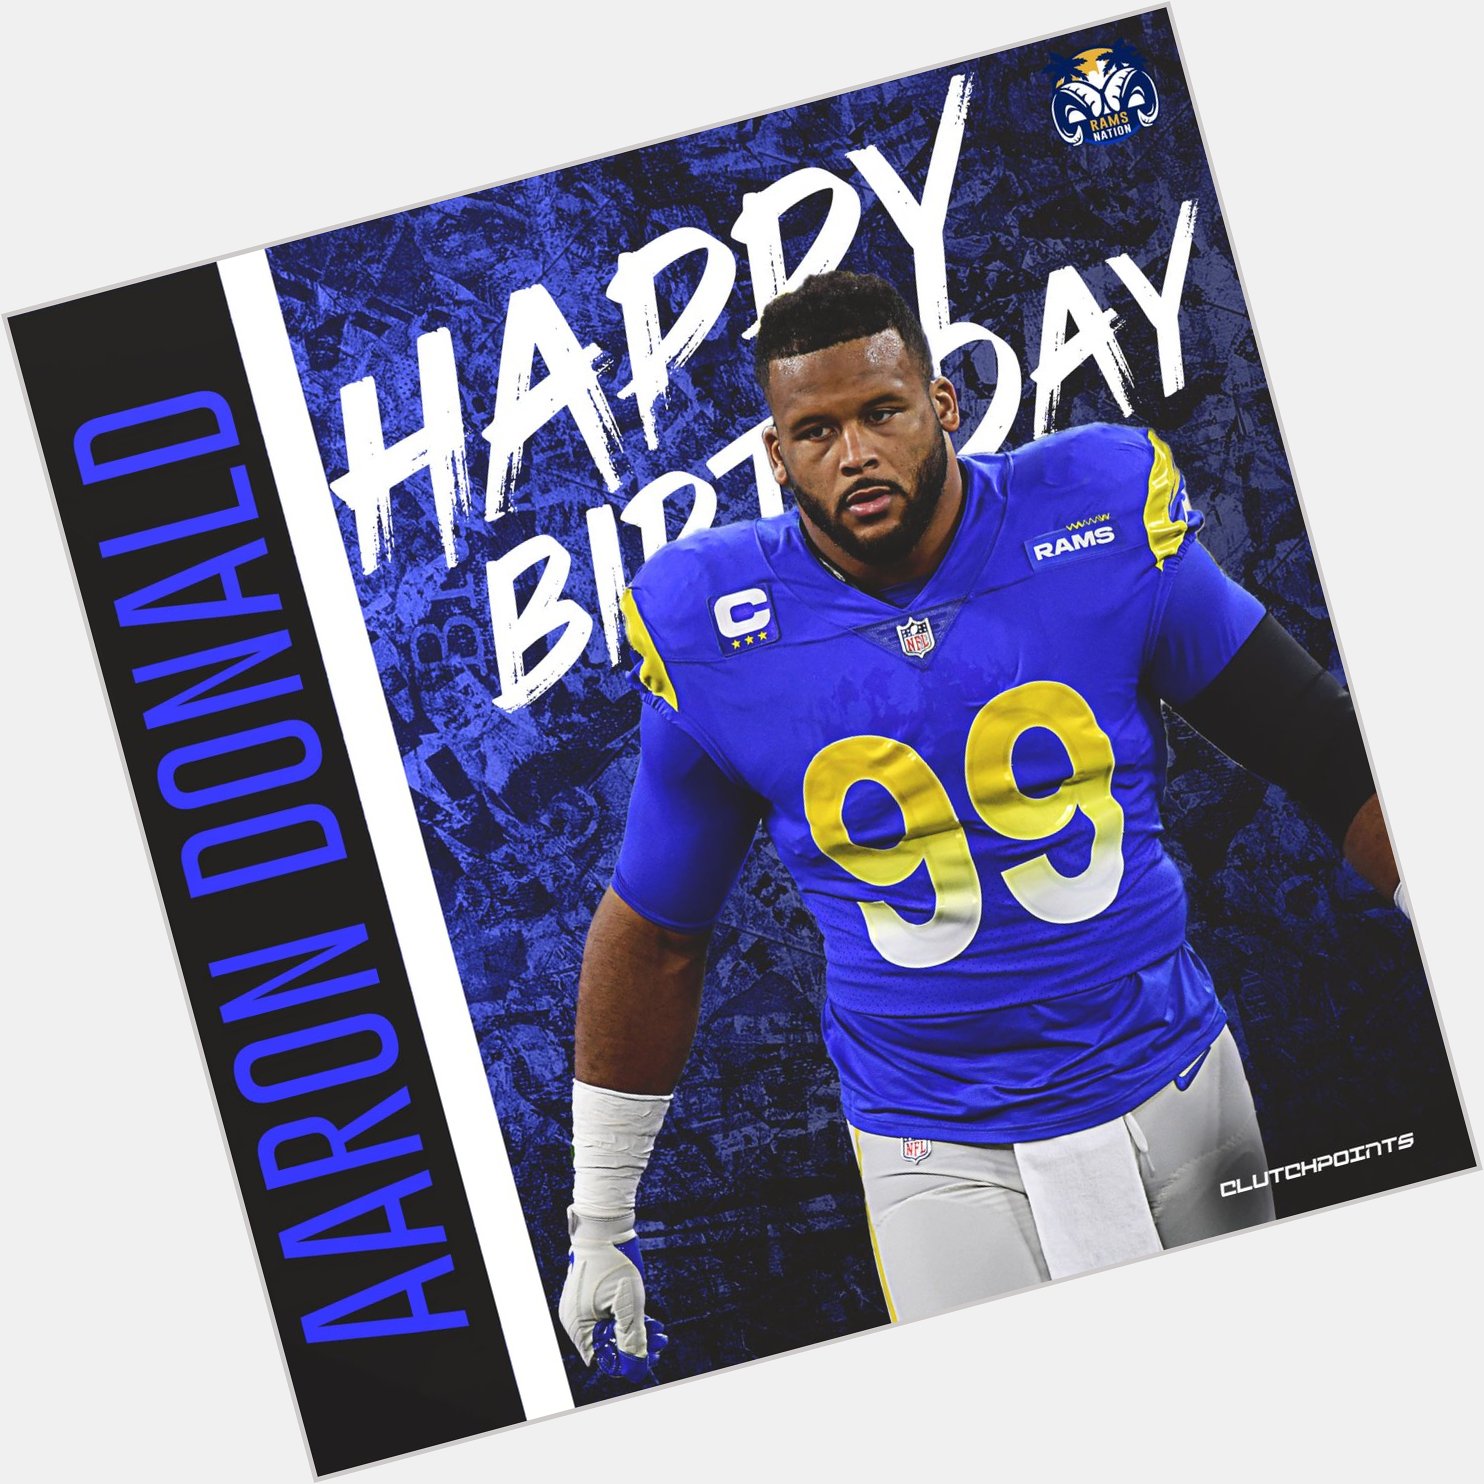 Let\s all wish our 3x DPOY, Aaron Donald, a happy 30th birthday! 